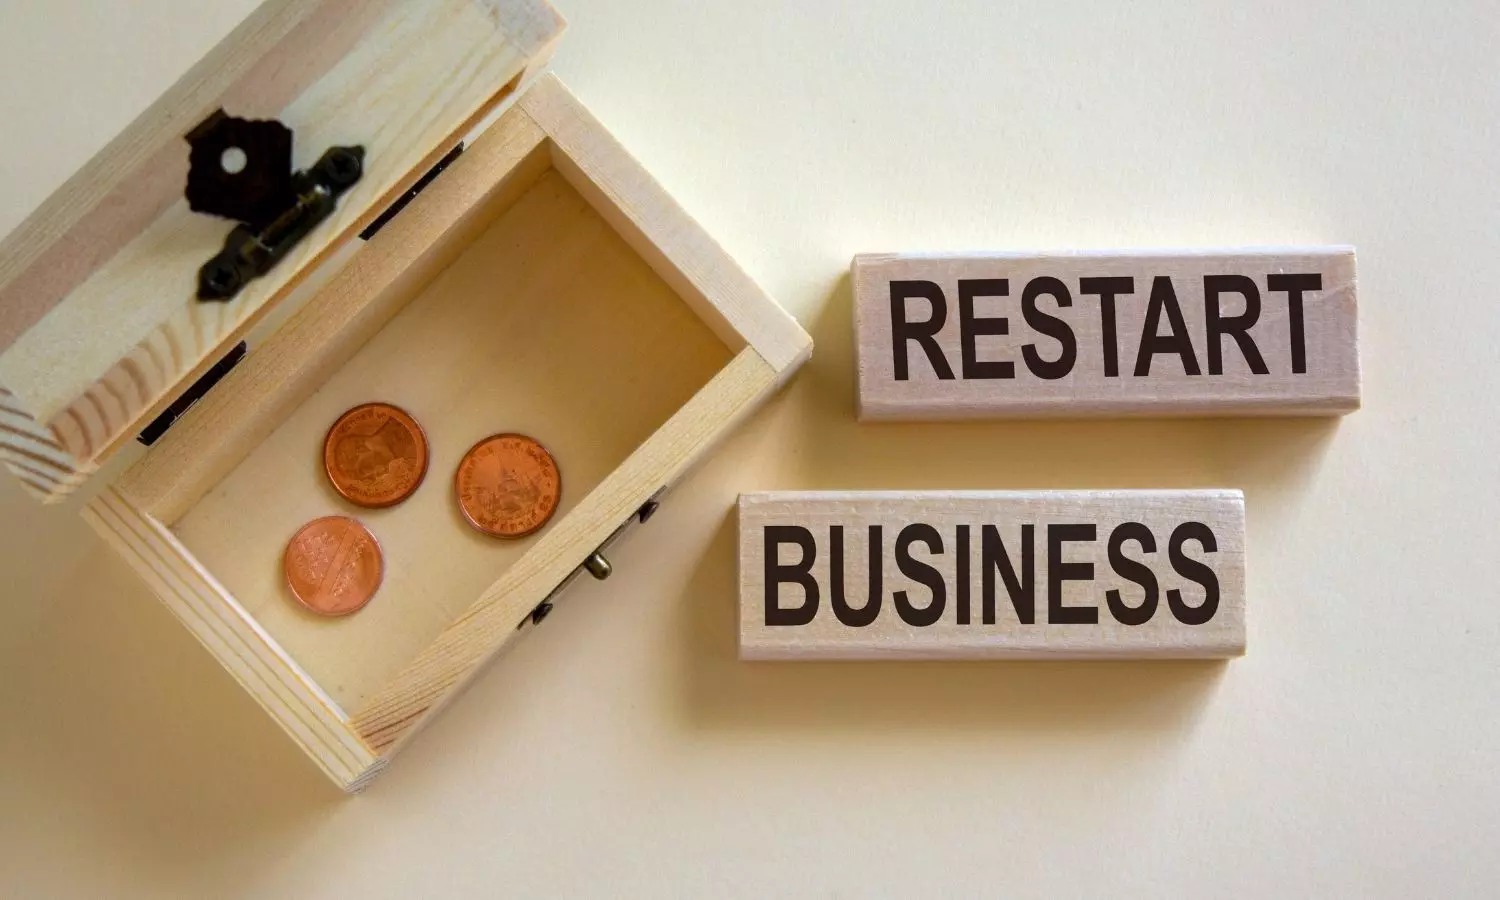 when you restart your business these things will help